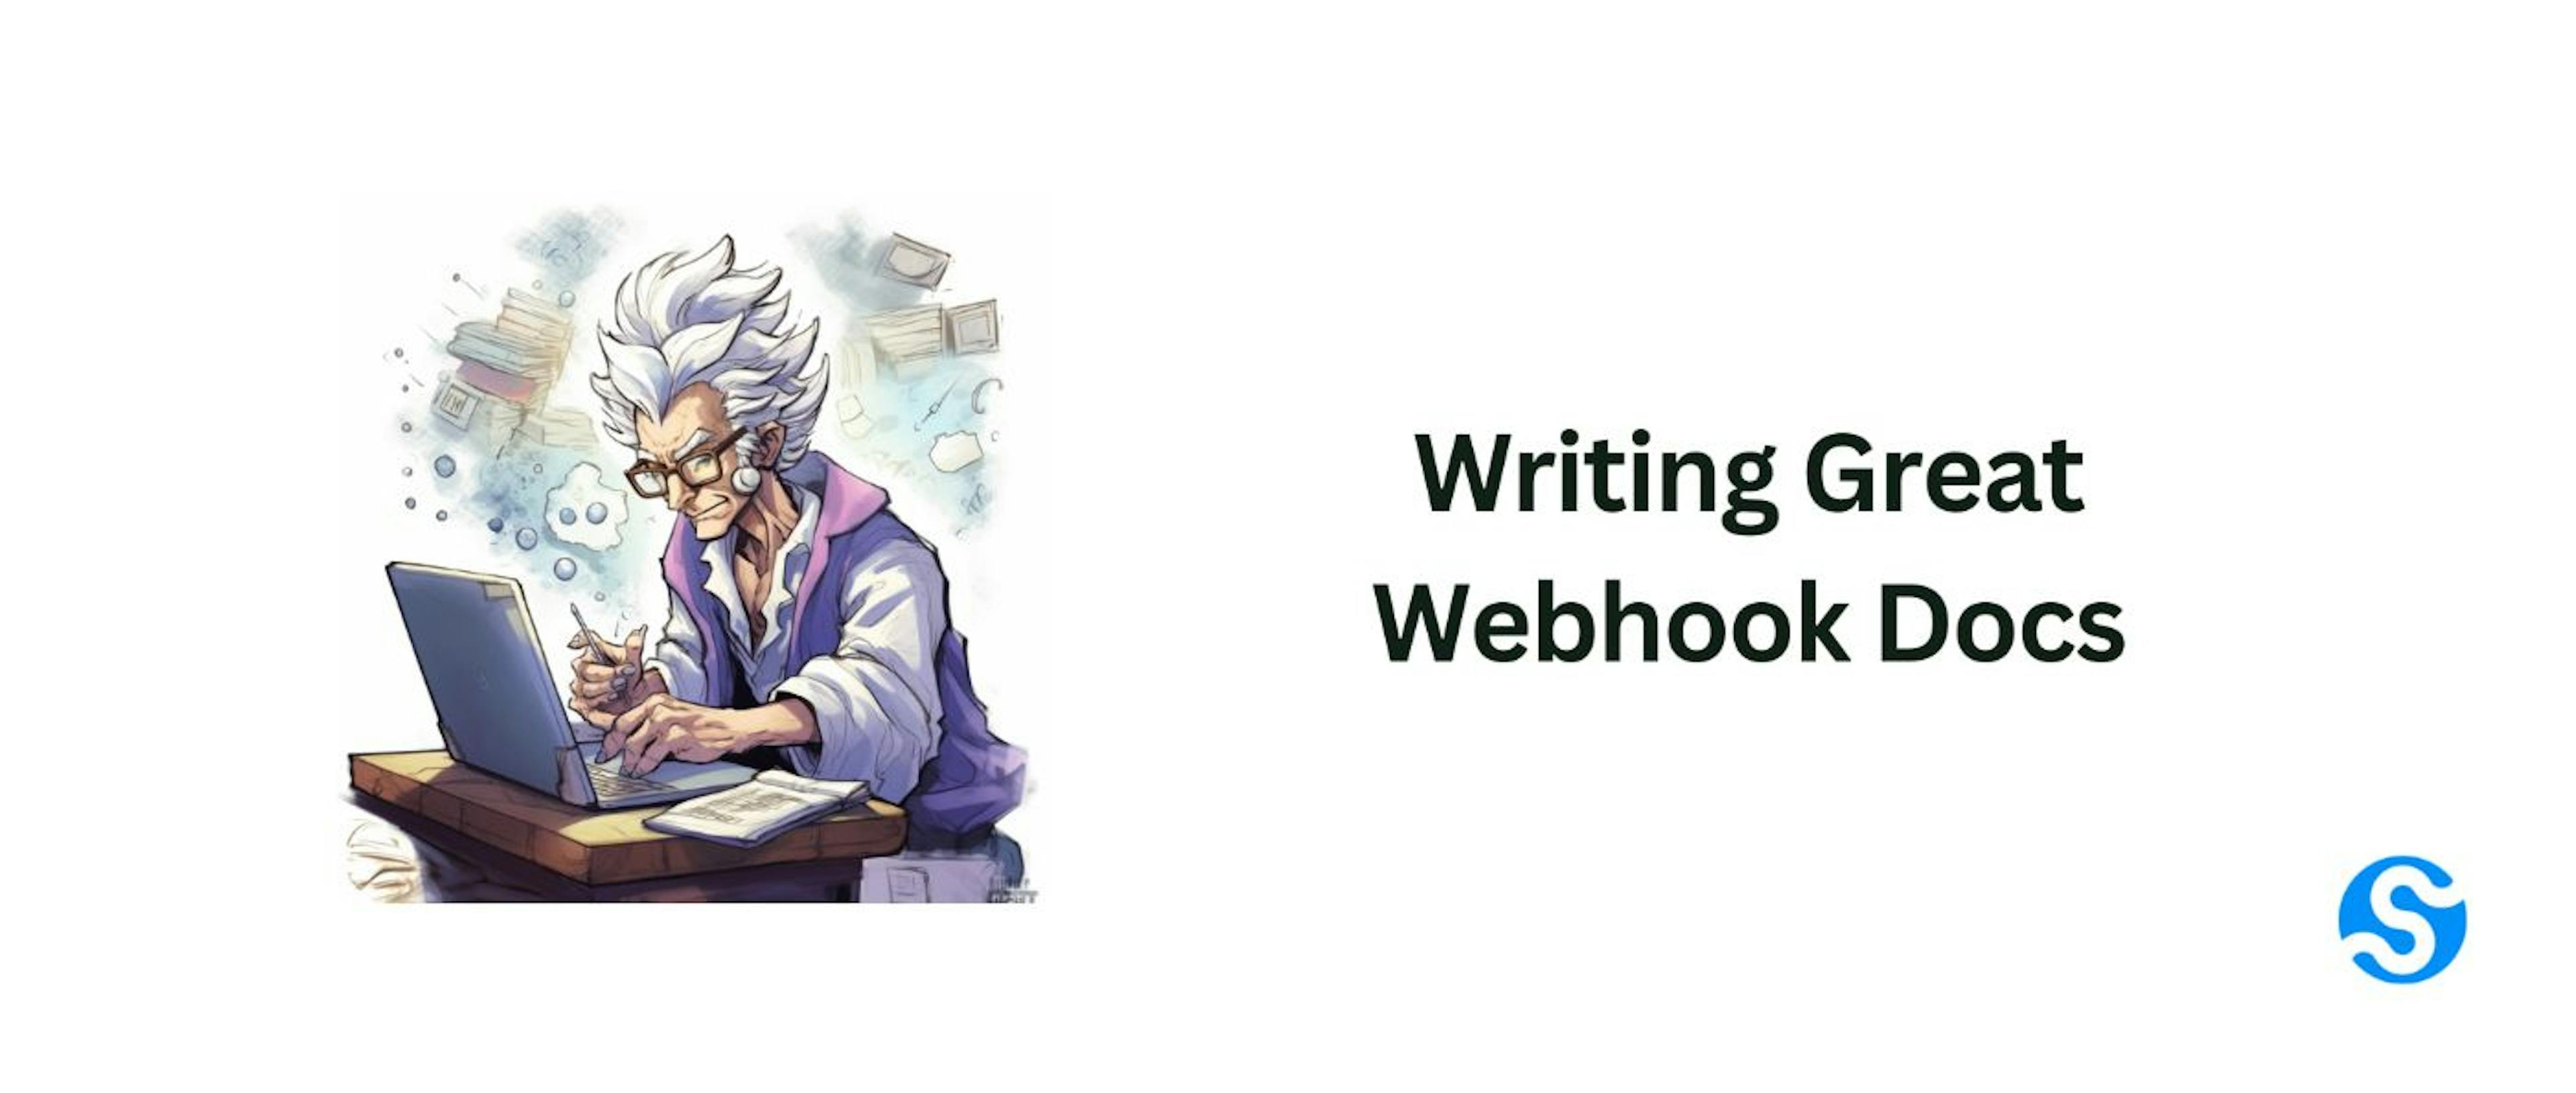 featured image - How to Write Great Webhook Docs